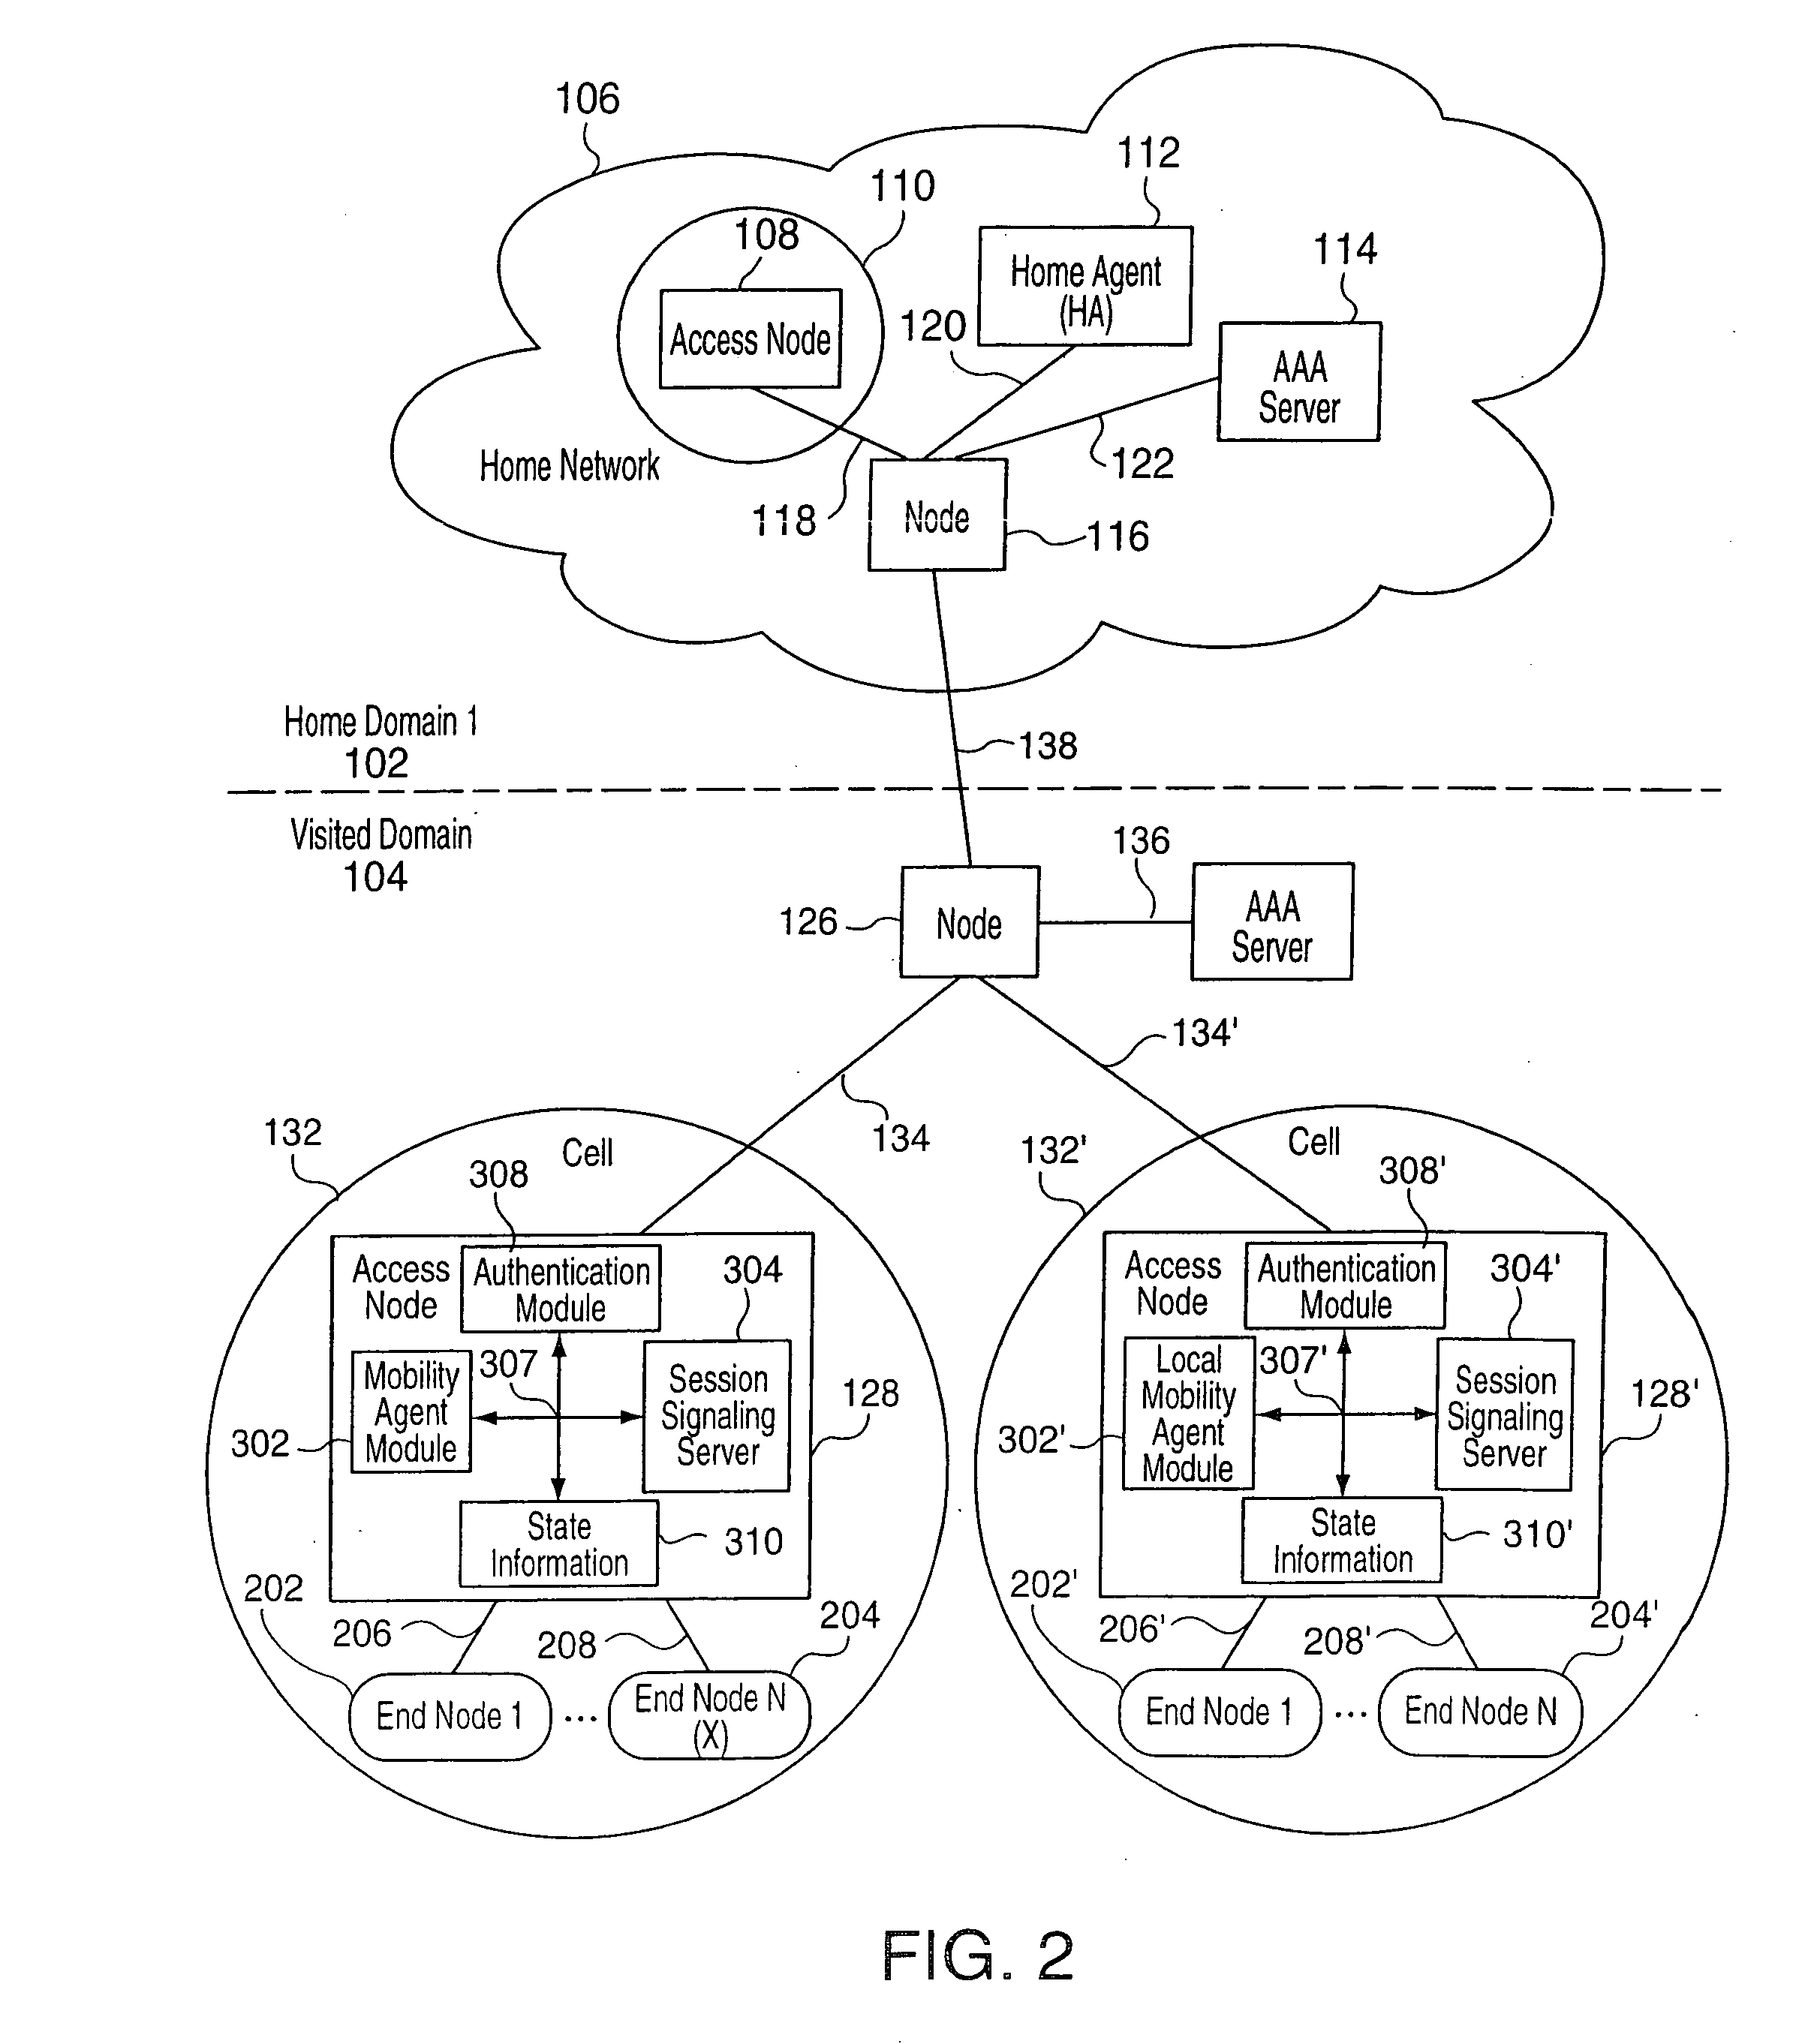 Method for extending mobile IP and AAA to enable integrated support for local access and roaming access connectivity